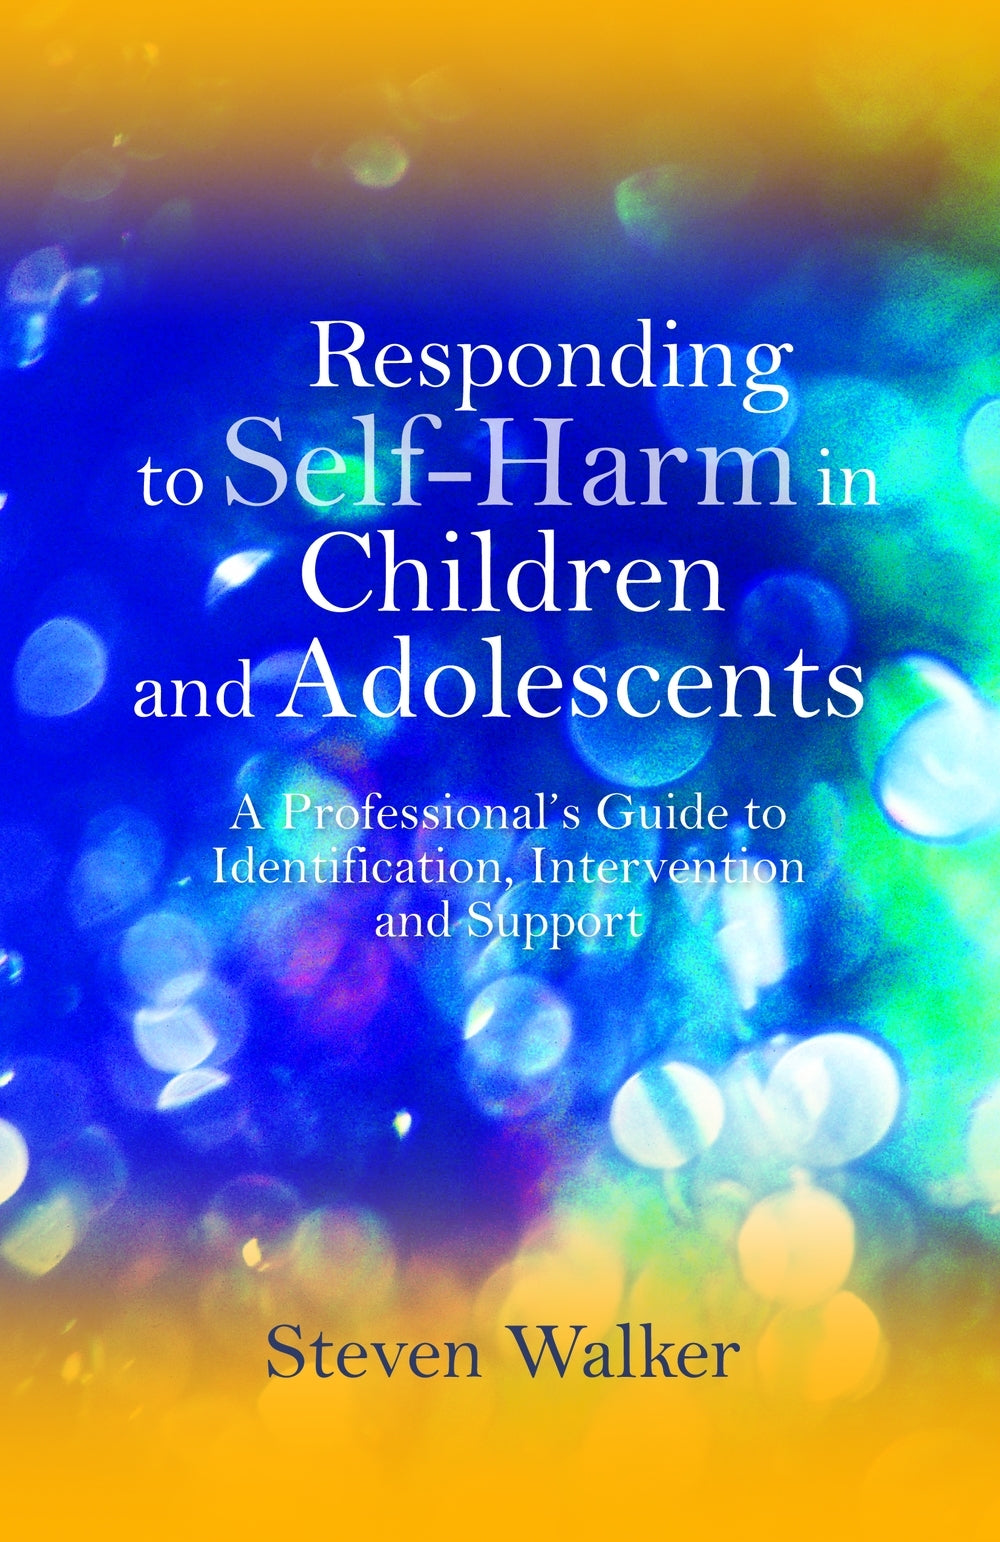 Responding to Self-Harm in Children and Adolescents by Steven Walker